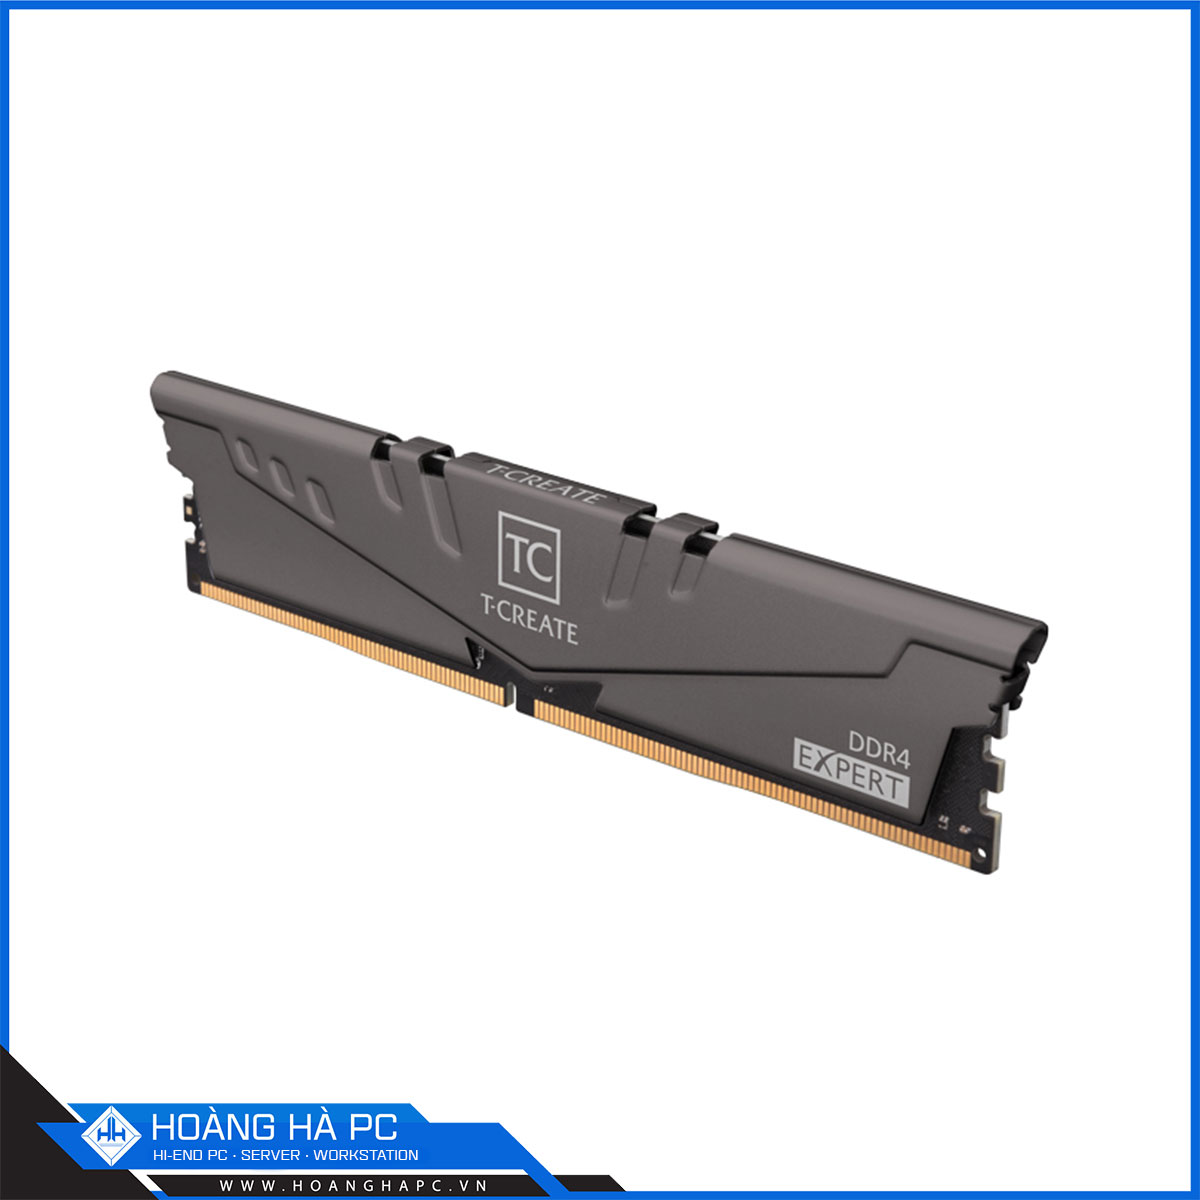 RAM TEAMGROUP T-CREAT EXPERT 16GB (1x16GB) DDR4 3200MHz